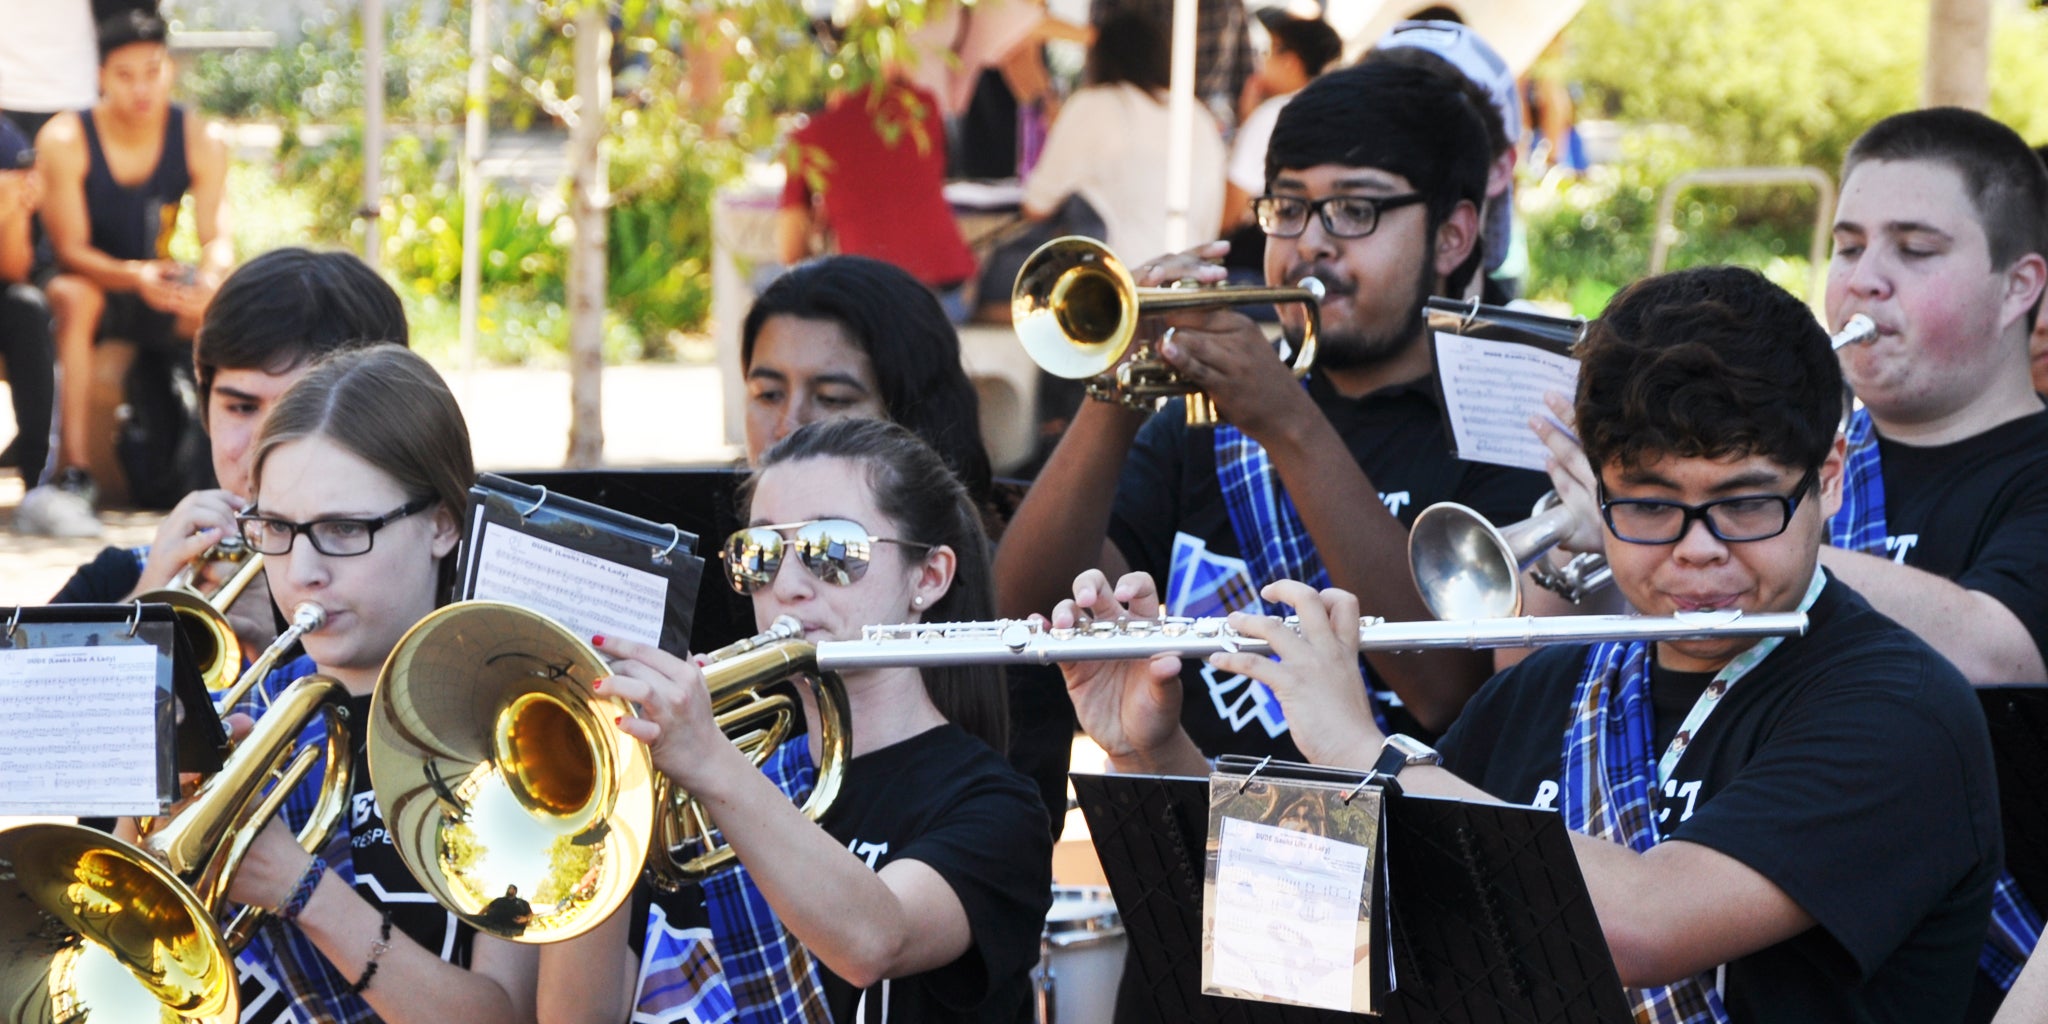 Members of the Highlander Pep Band perform for other students on the UCR campus.